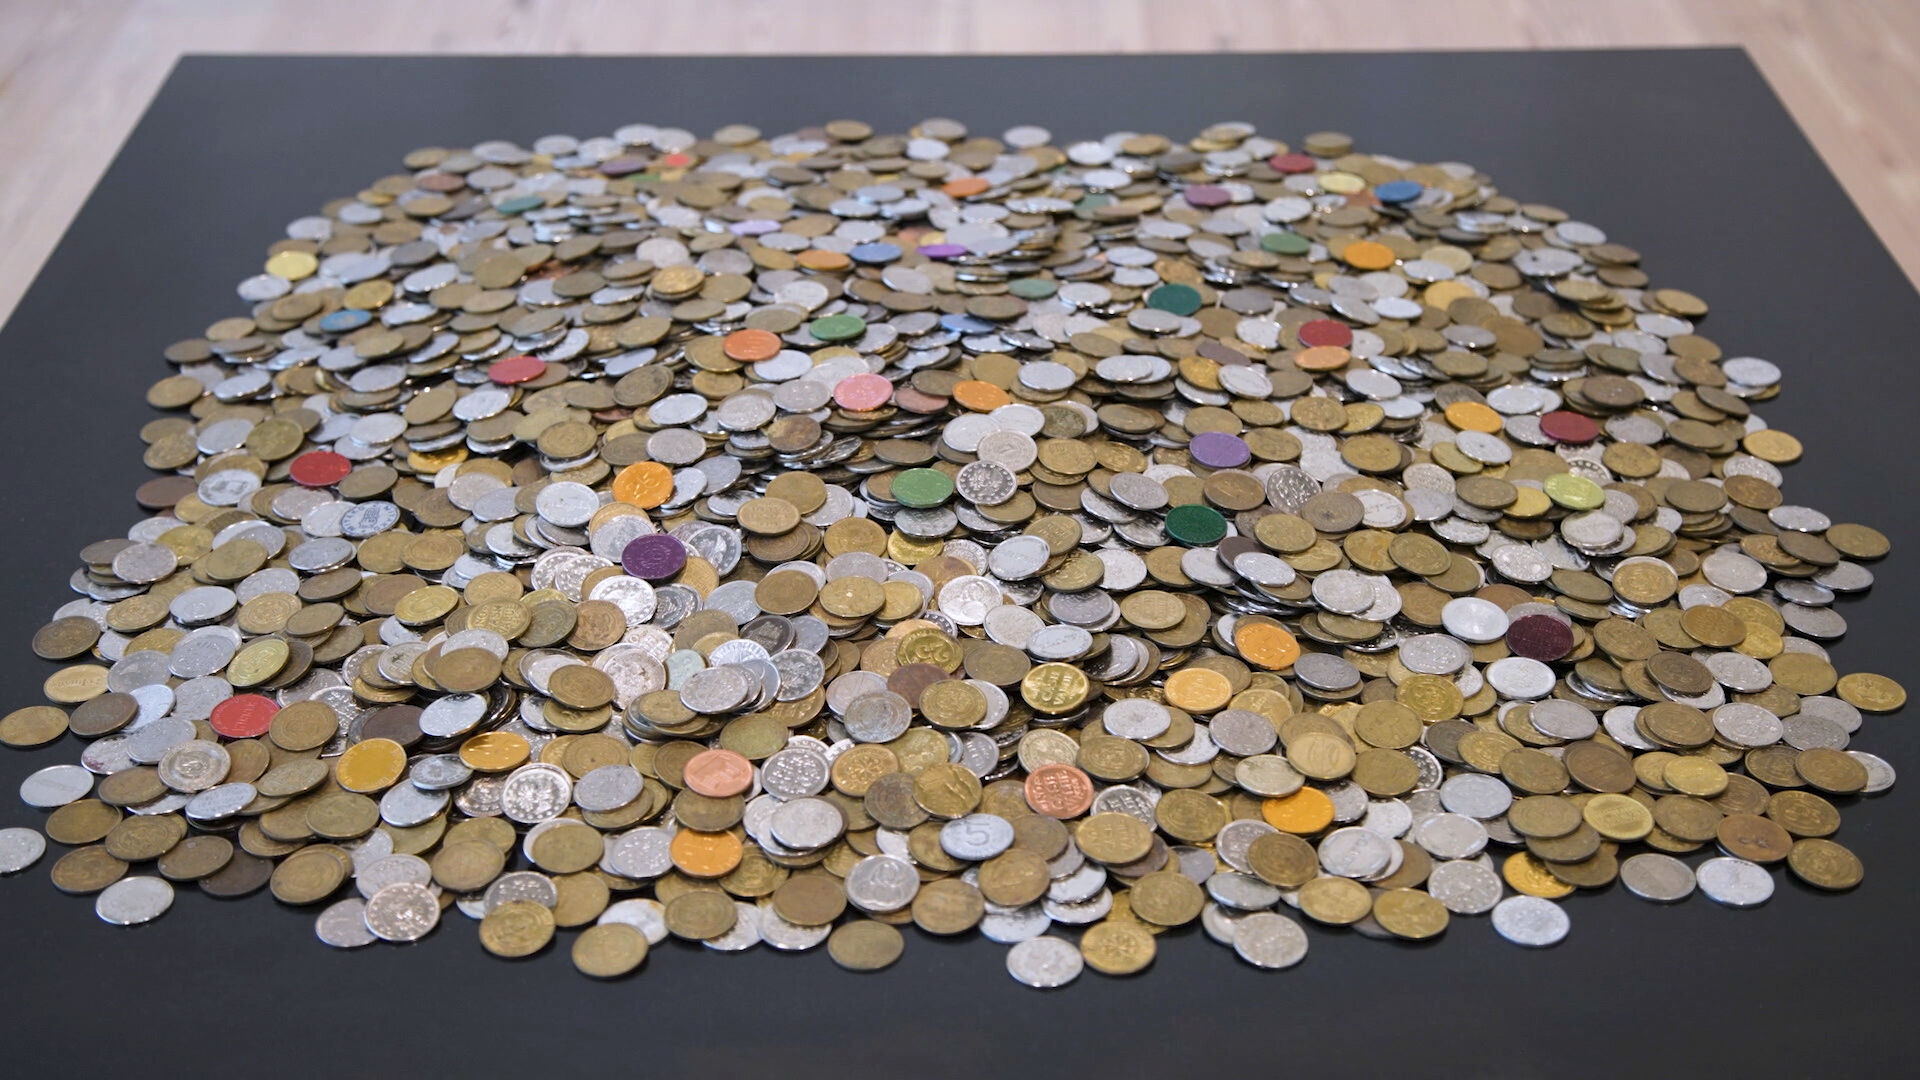 Many different kinds of coins and small, flat, round-shaped objects.